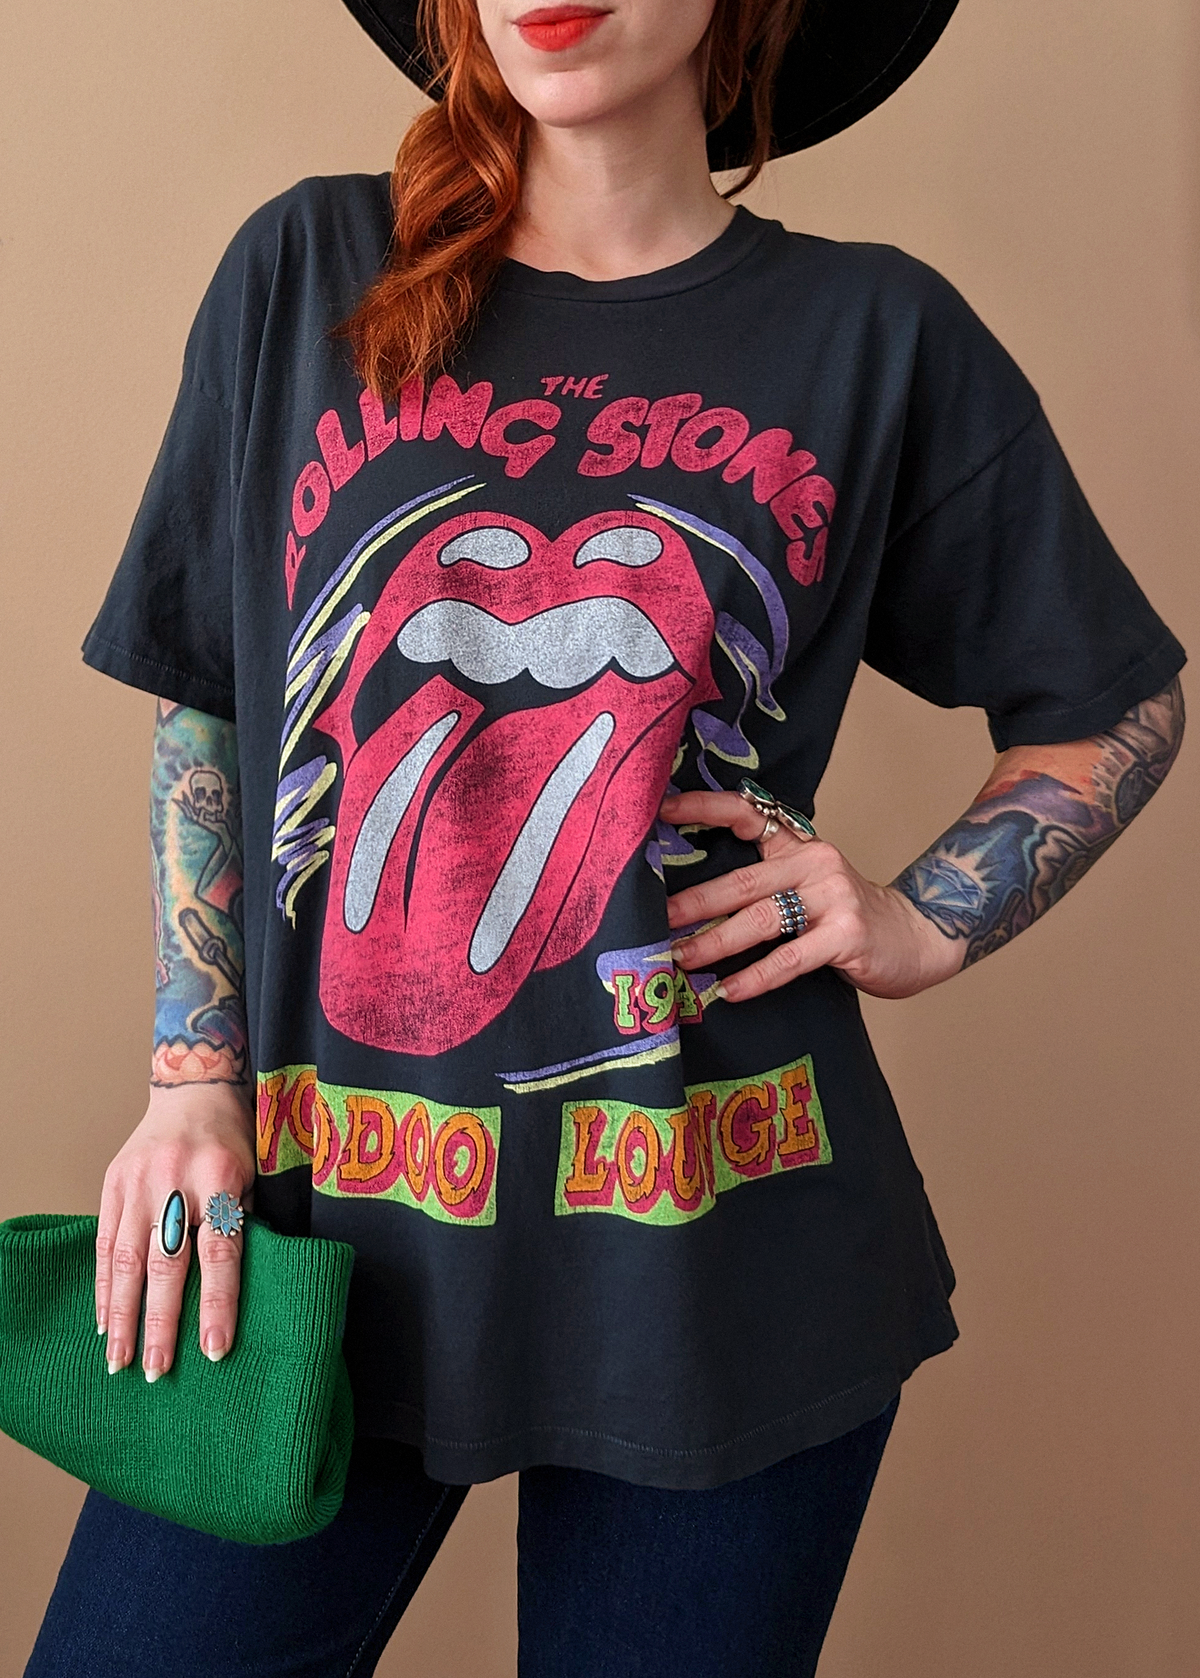 Daydreamer LA Rolling Stones Voodoo Lounge World Tour 1994 Officially licensed oversized tee. Made in California